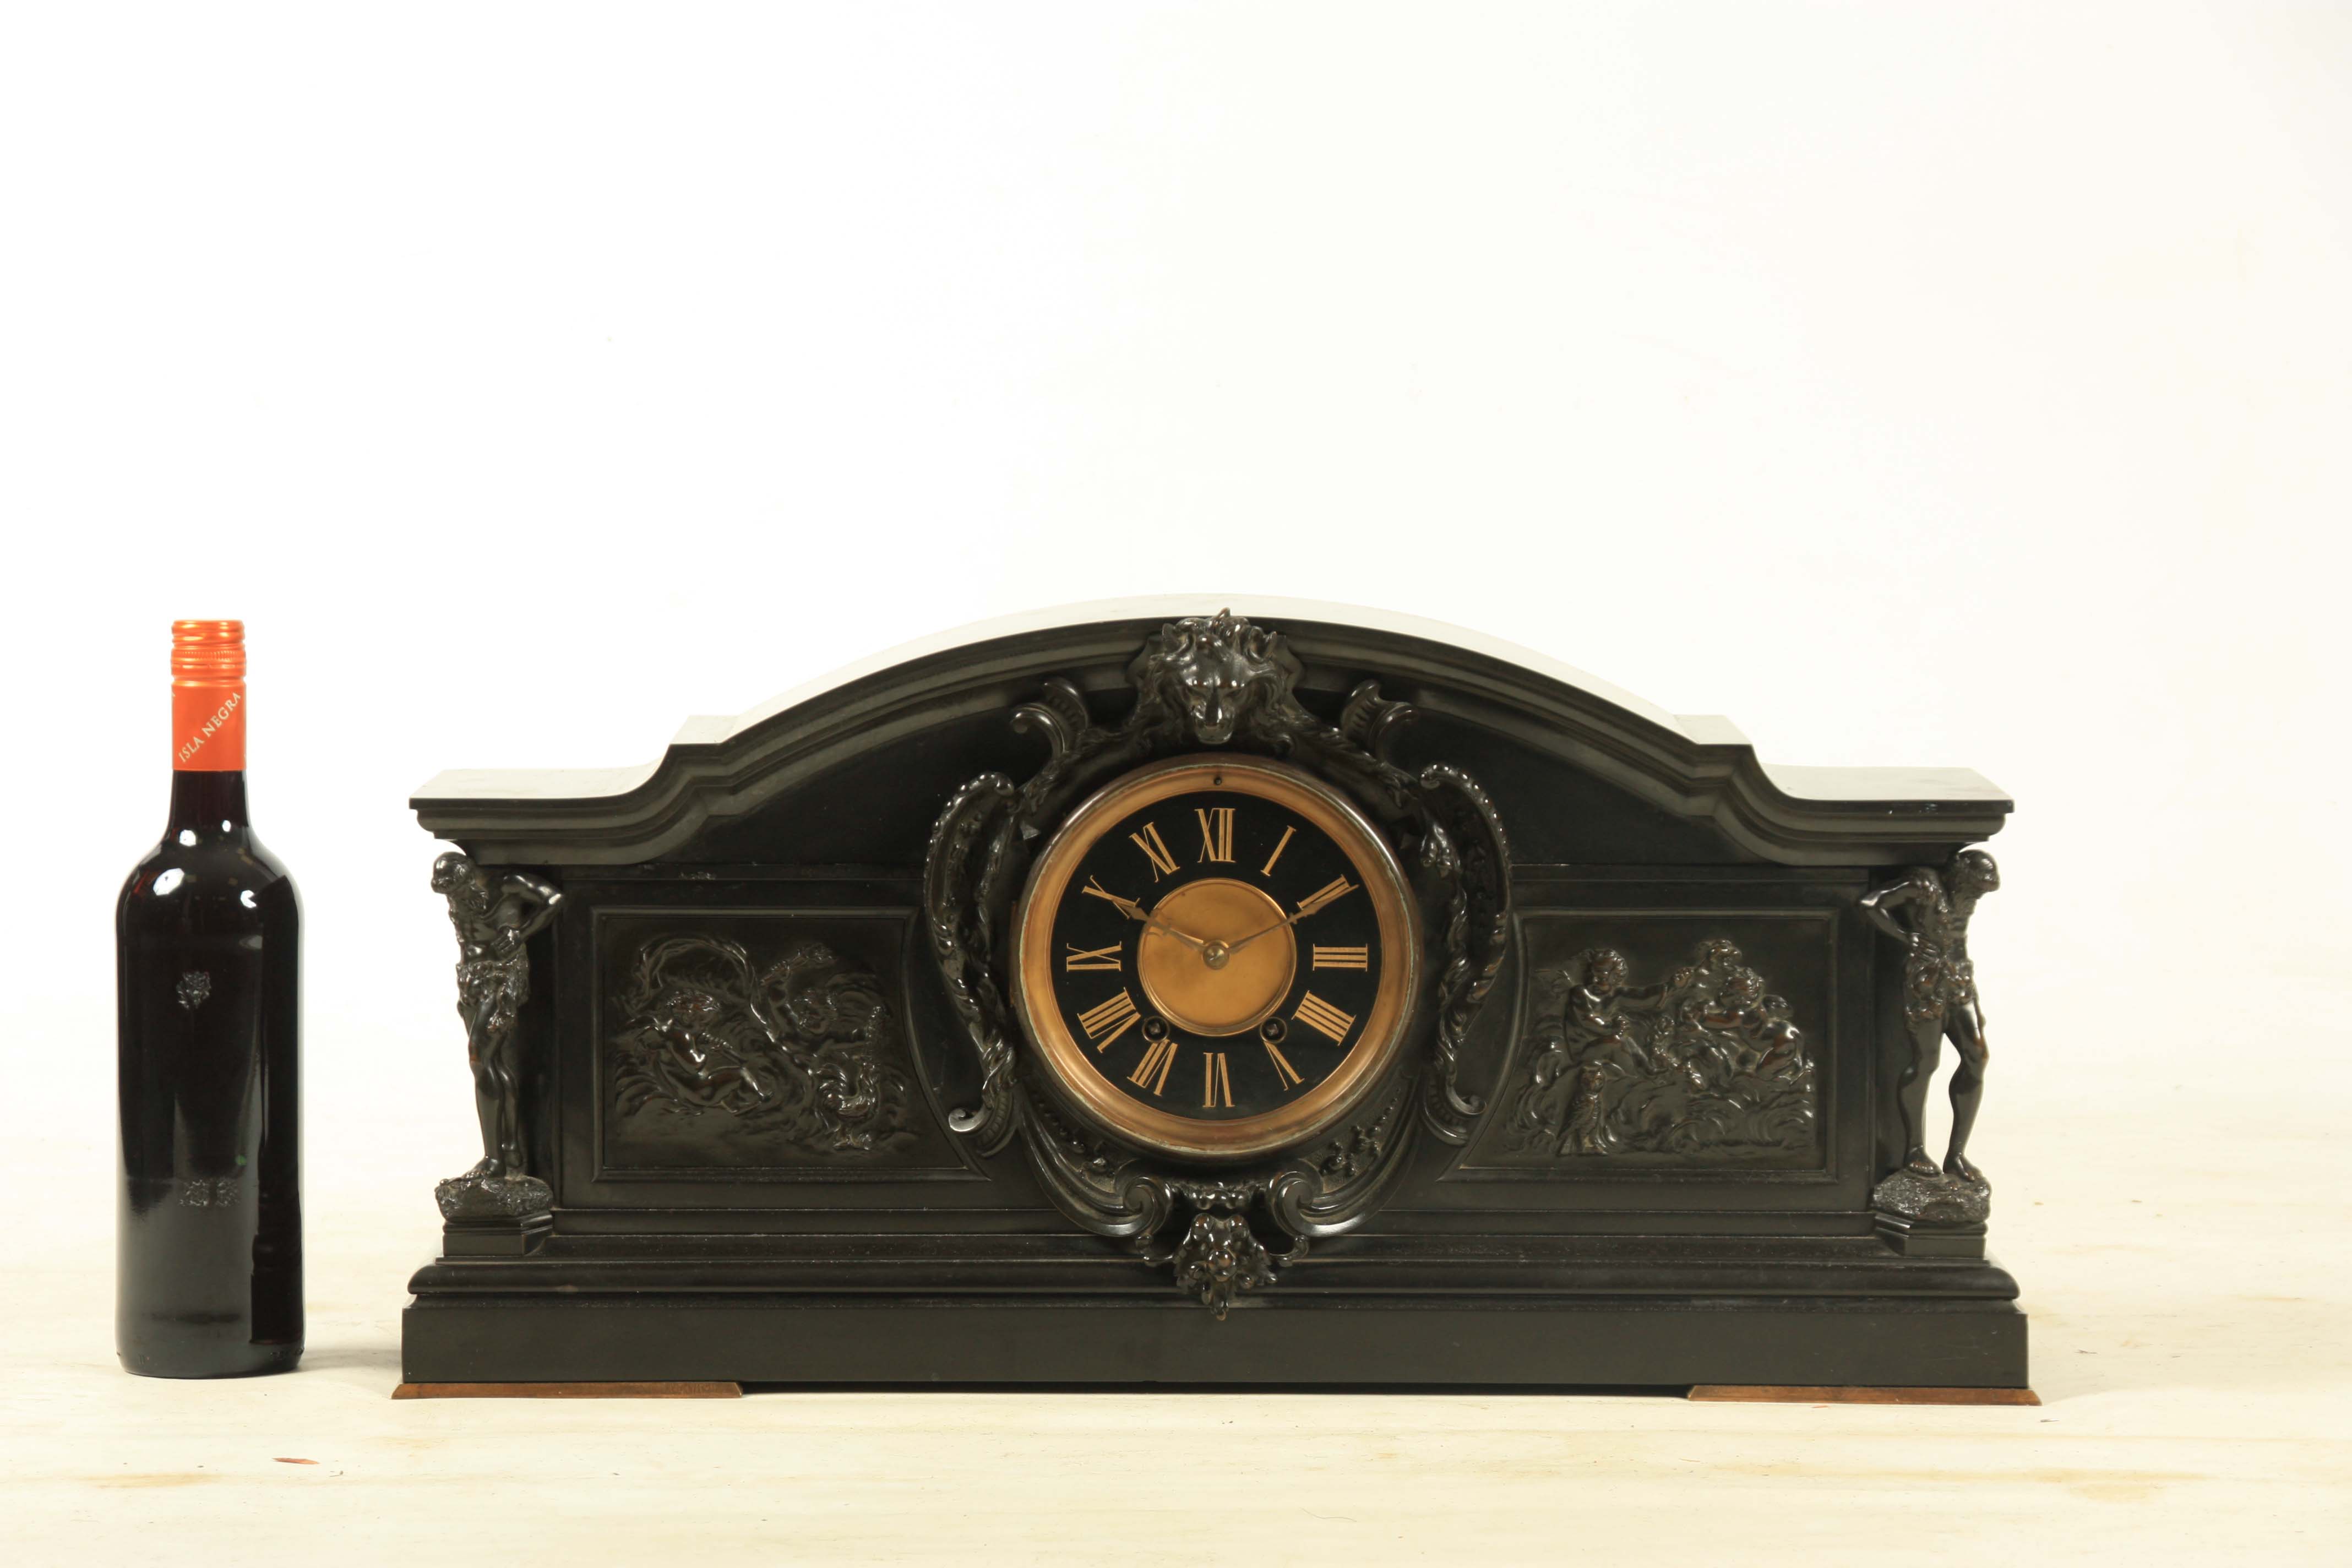 A LARGE LATE 19TH CENTURY BLACK SLATE AND BRONZE MOUNTED MANTEL CLOCK the arched case with moulded - Image 2 of 6